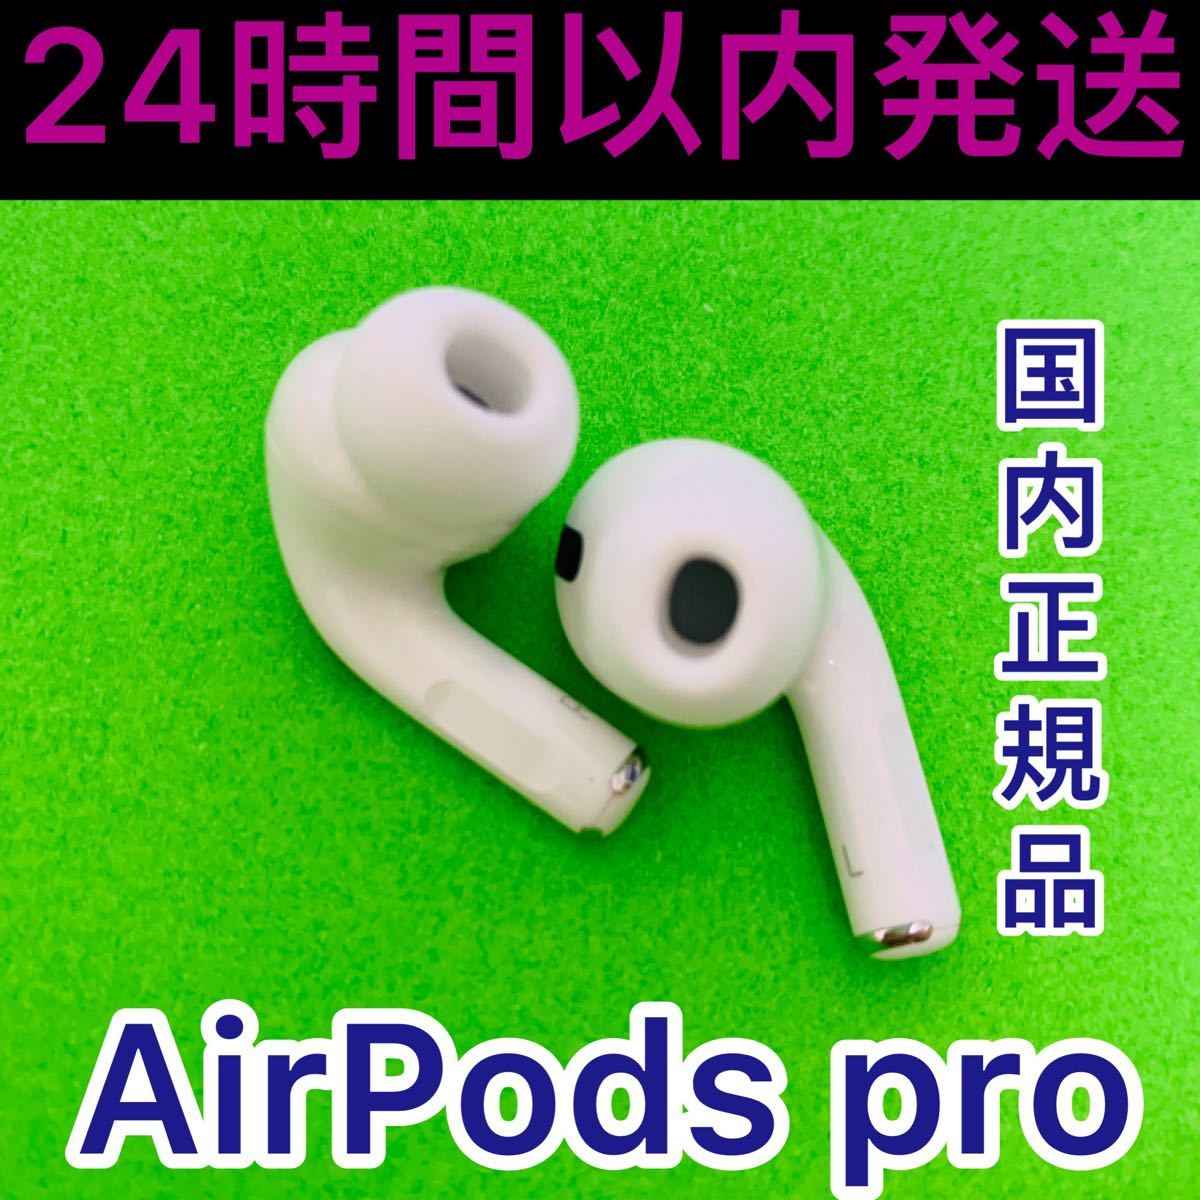 SALE／76%OFF】 のみ イヤホン Pro AirPods 両耳 イヤフォン